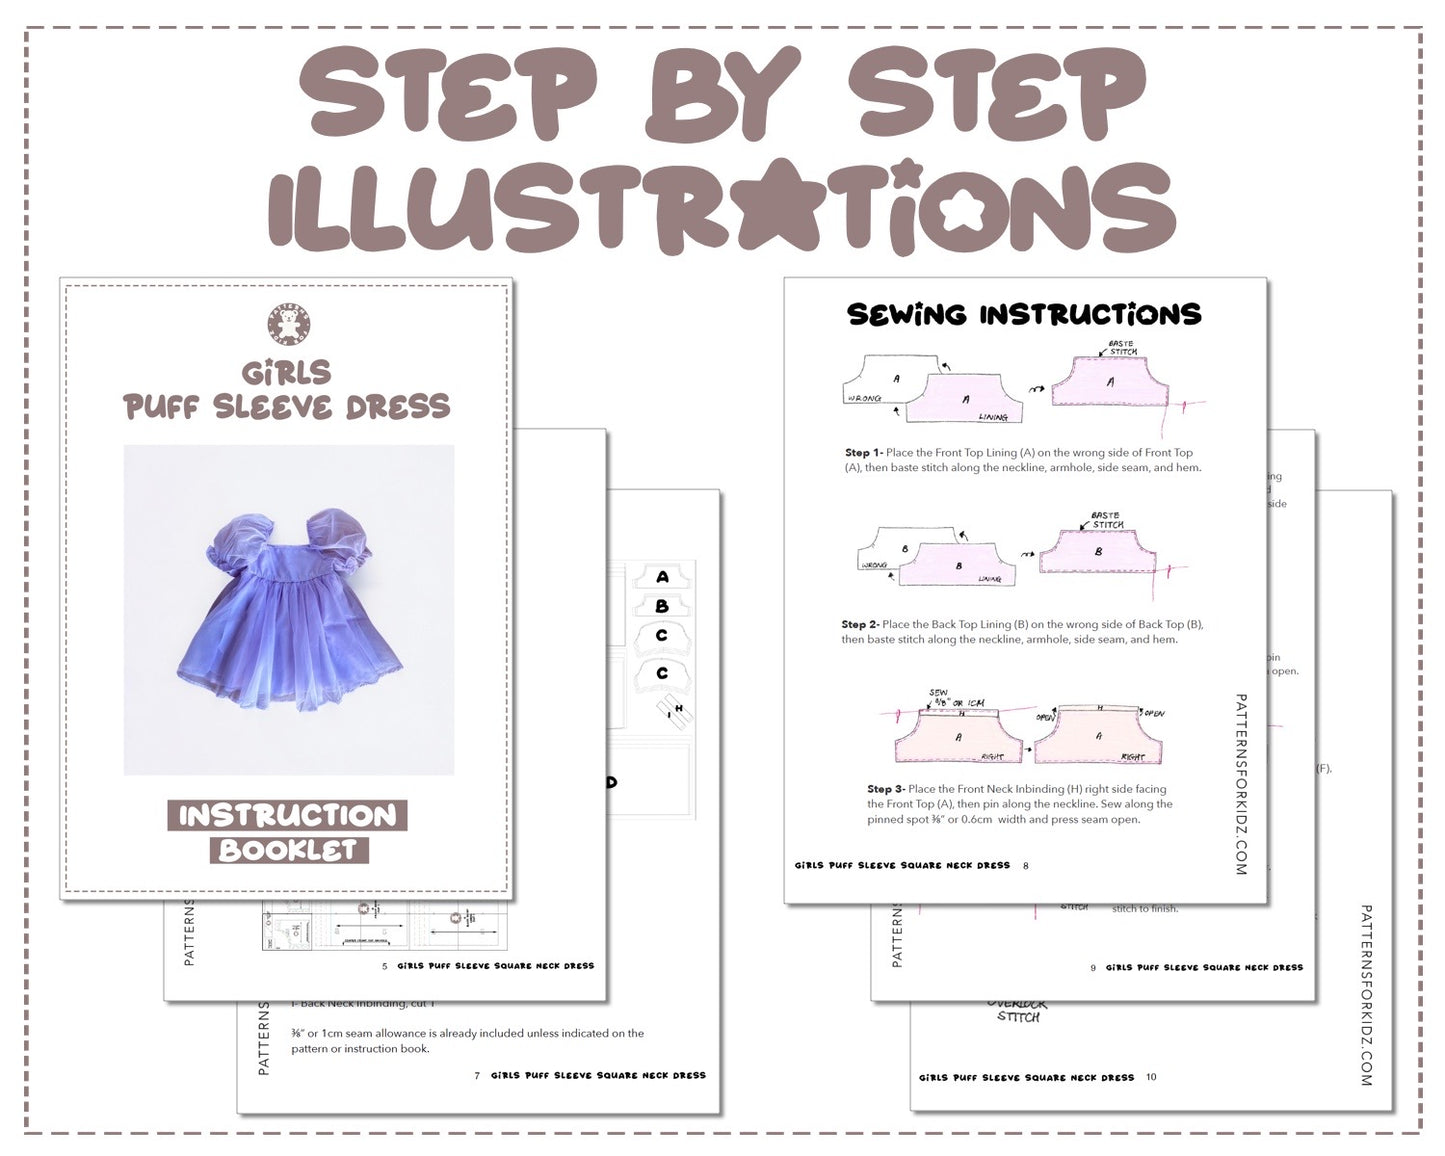 Girls Puff Sleeve Square Neck Dress sewing pattern step by step illustrations.